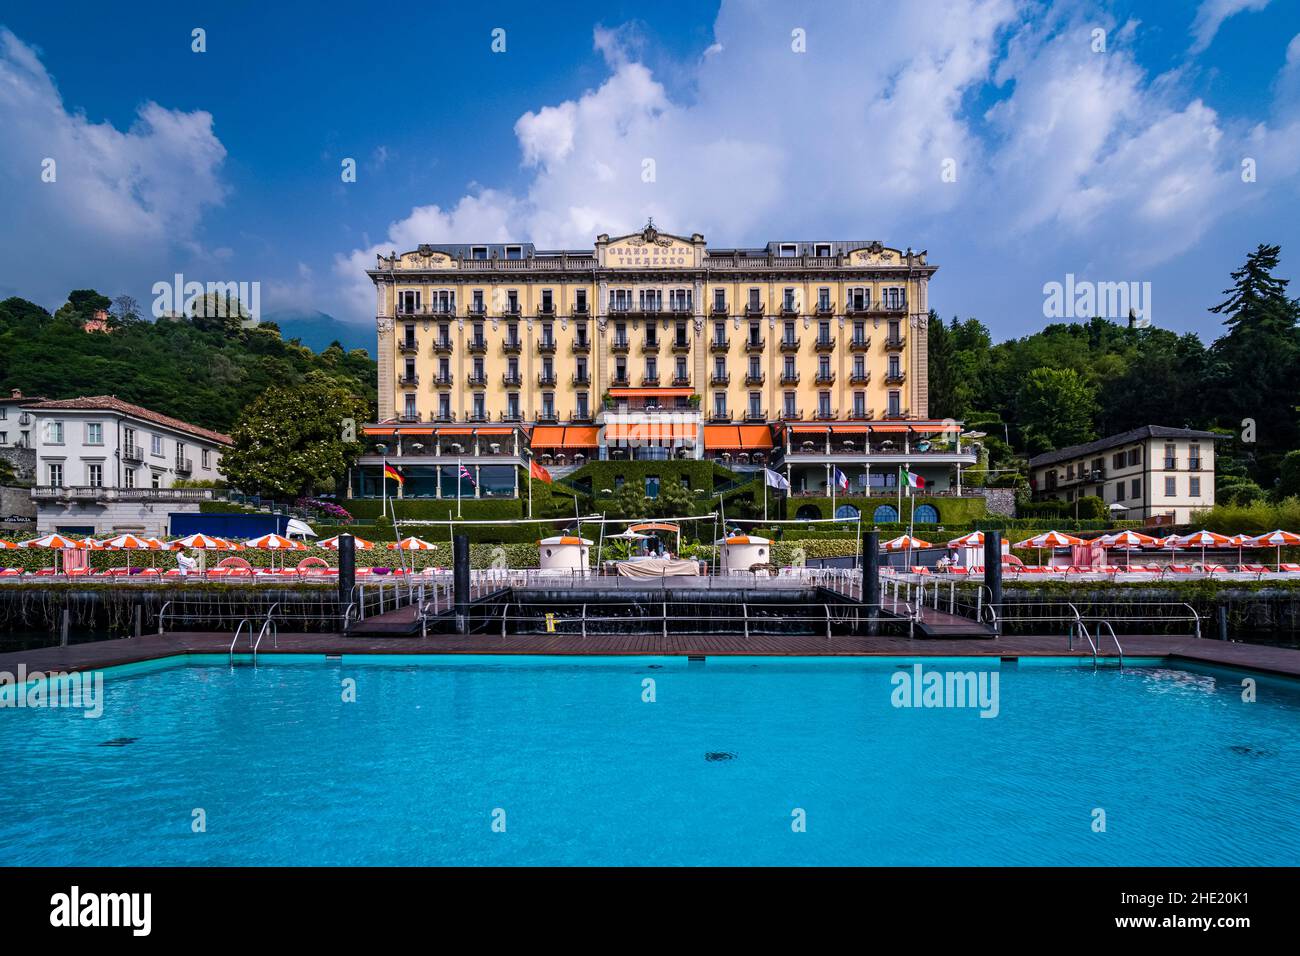 Grand Hotel Tremezzo, located at the lakeside of Lake Como, was built in the early 20th century. Stock Photo